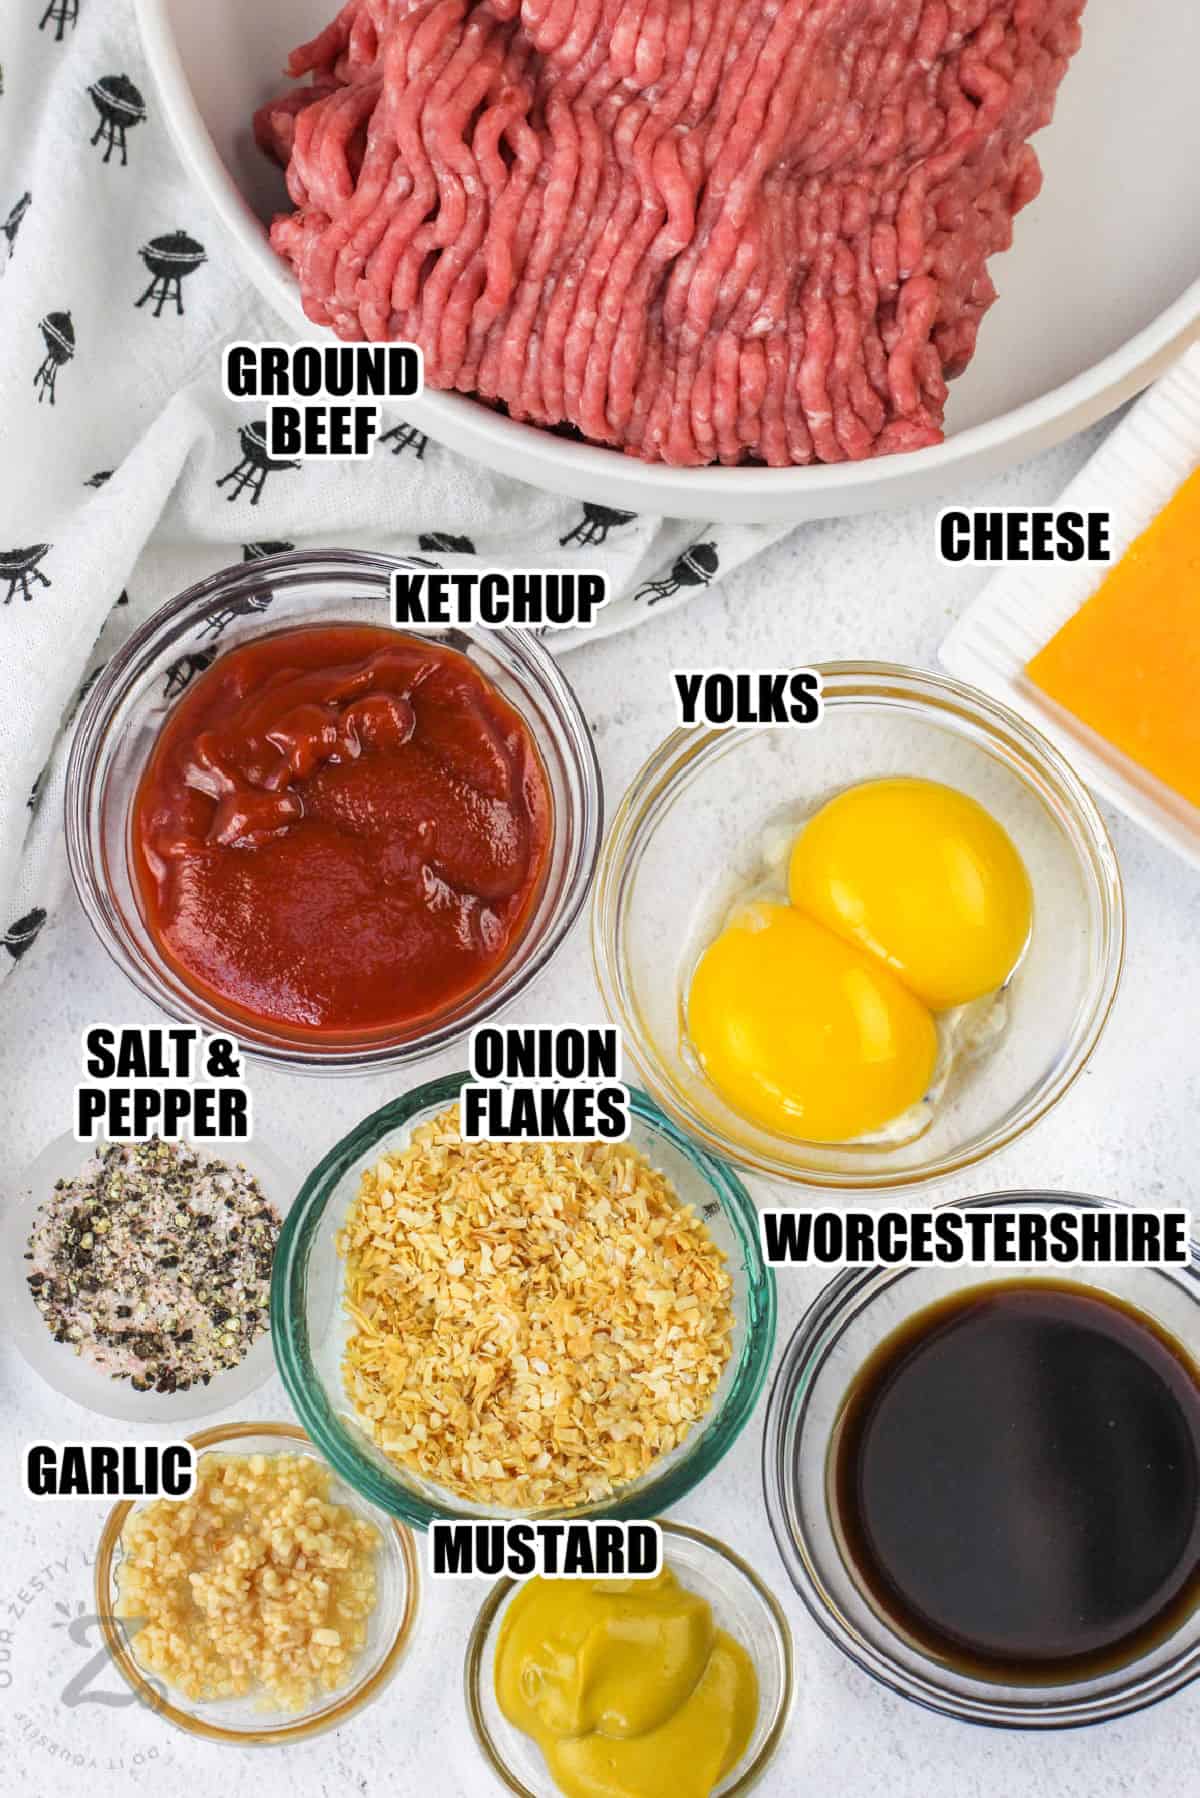 beef , ketchup, mustard, cheese , onion flakes and other ingredients in bowls to make Hamburger Patties with labels